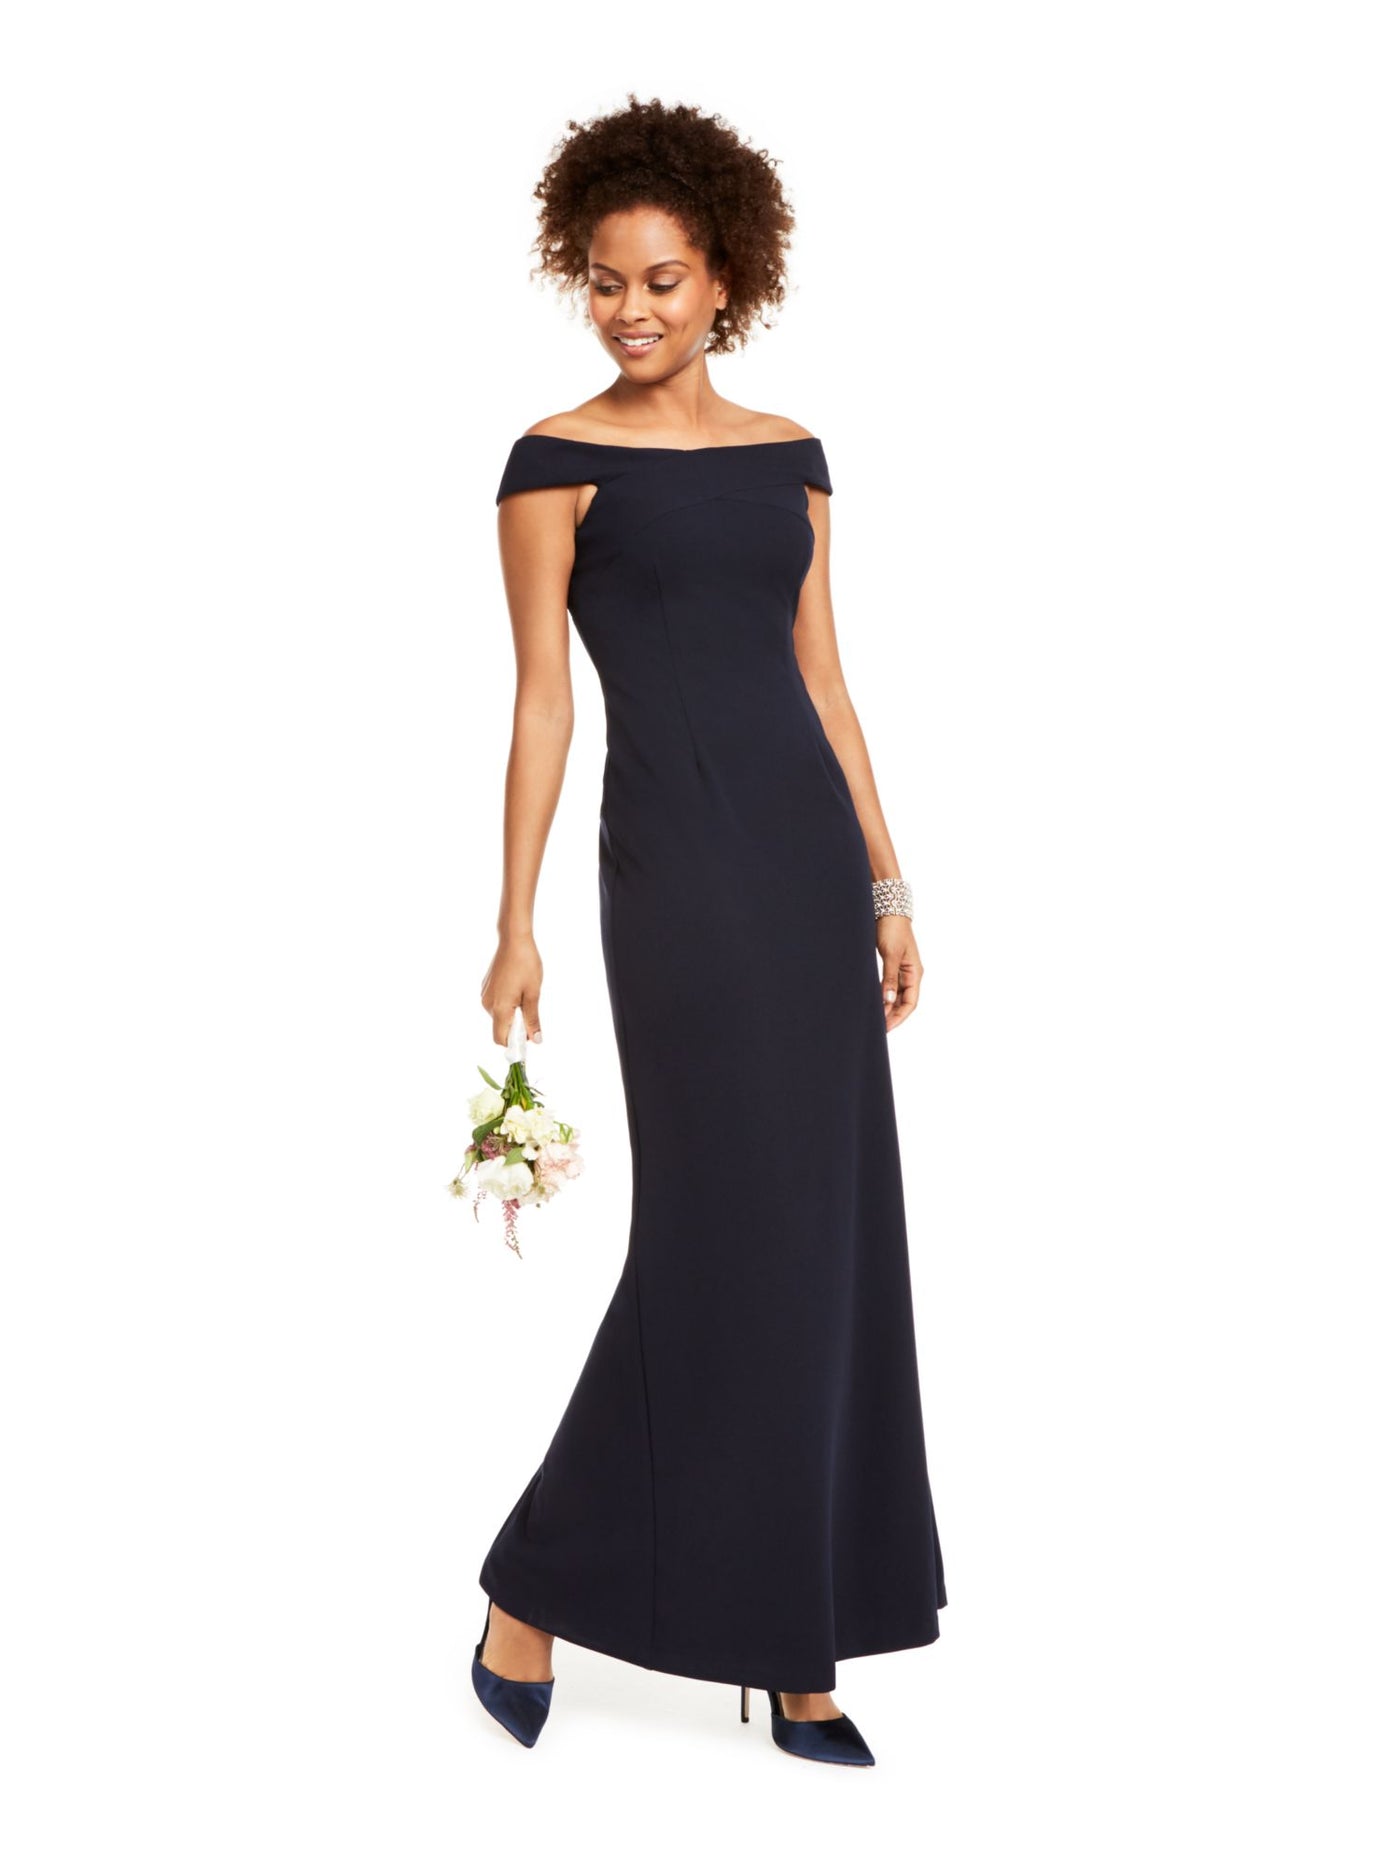 ADRIANNA PAPELL Womens Navy Slitted Cap Sleeve Off Shoulder Full-Length Formal Sheath Dress 16